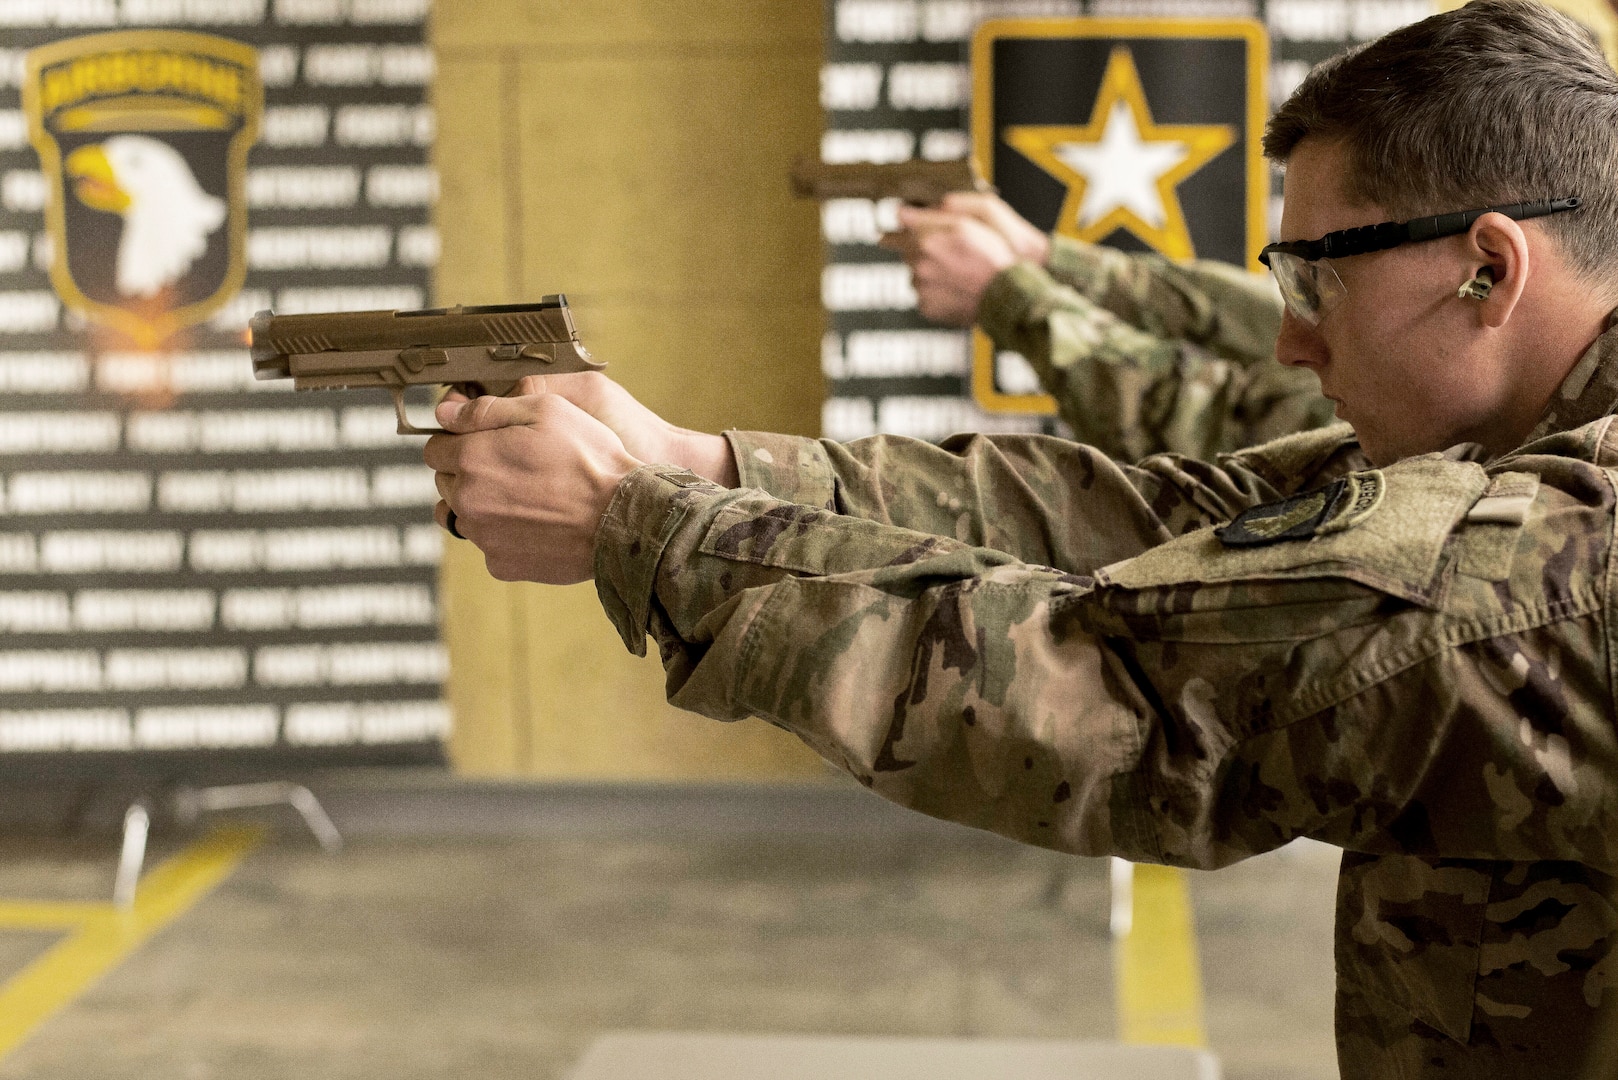 A soldier with 1st Brigade Combat Team, 101st Airborne Division (Air Assault), fires the new M17, or Modular Handgun System, at the 5th Special Forces Group (Airborne) indoor range. The 101st Airborne Division (Air Assault), the world’s only air assault division, is the first unit in the Army to field the service’s new handgun which replaces the M9 pistol, the standard Army sidearm since 1986.